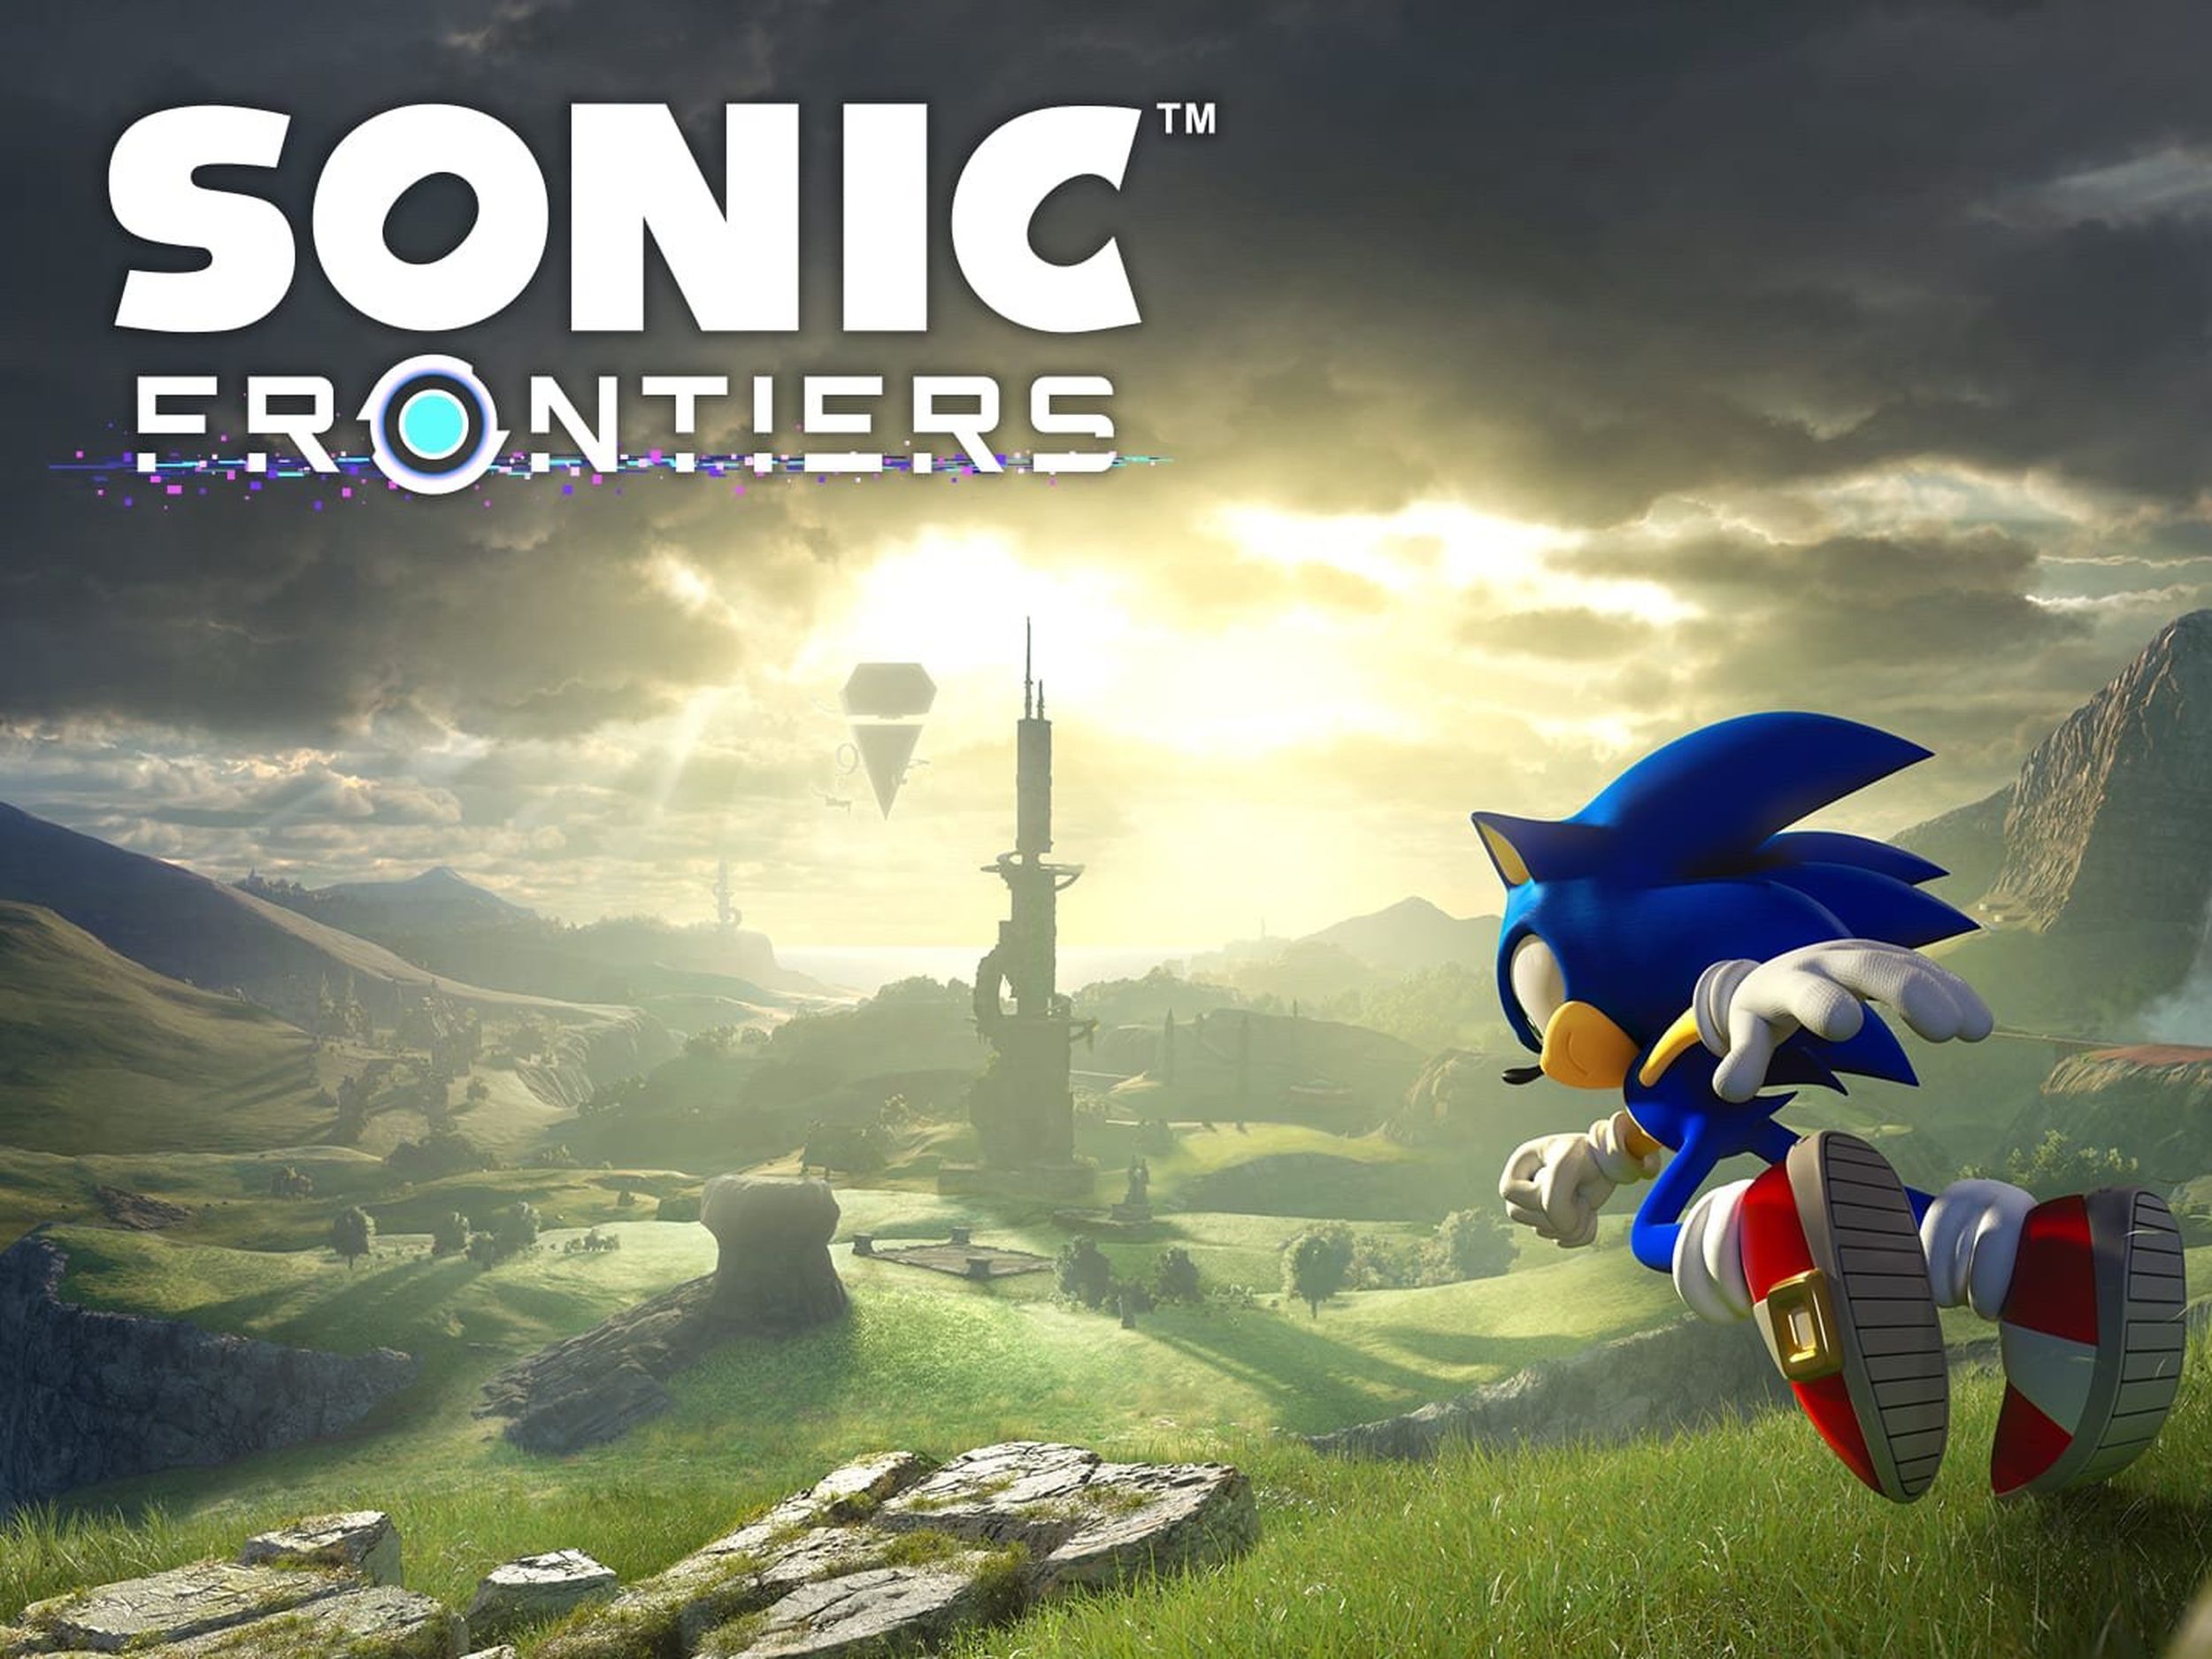 Sonic Frontiers Newsletter Subscribers Are Getting FREE Sonic